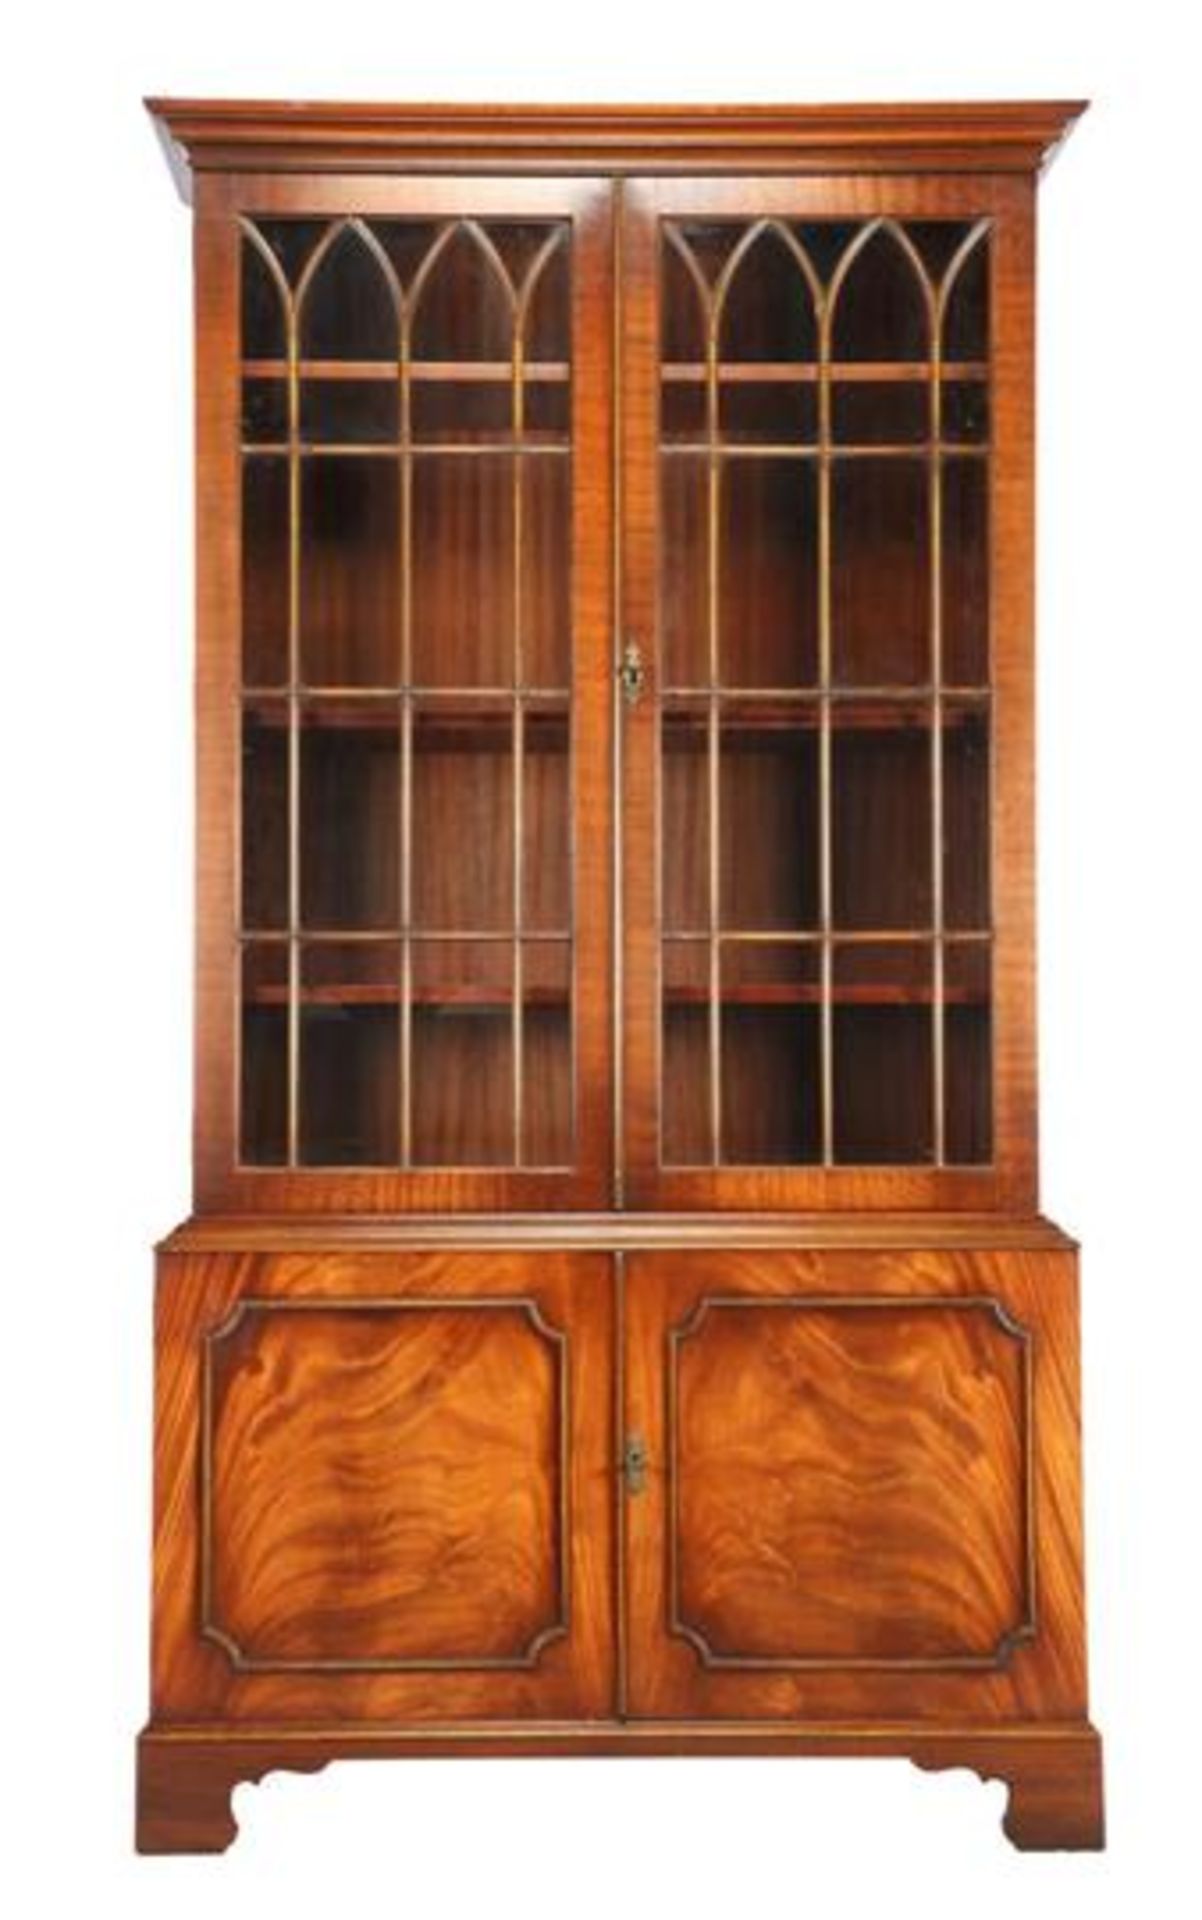 Mahogany veneer showcase with 2-door display area with window division (1 window with crack) and 2-